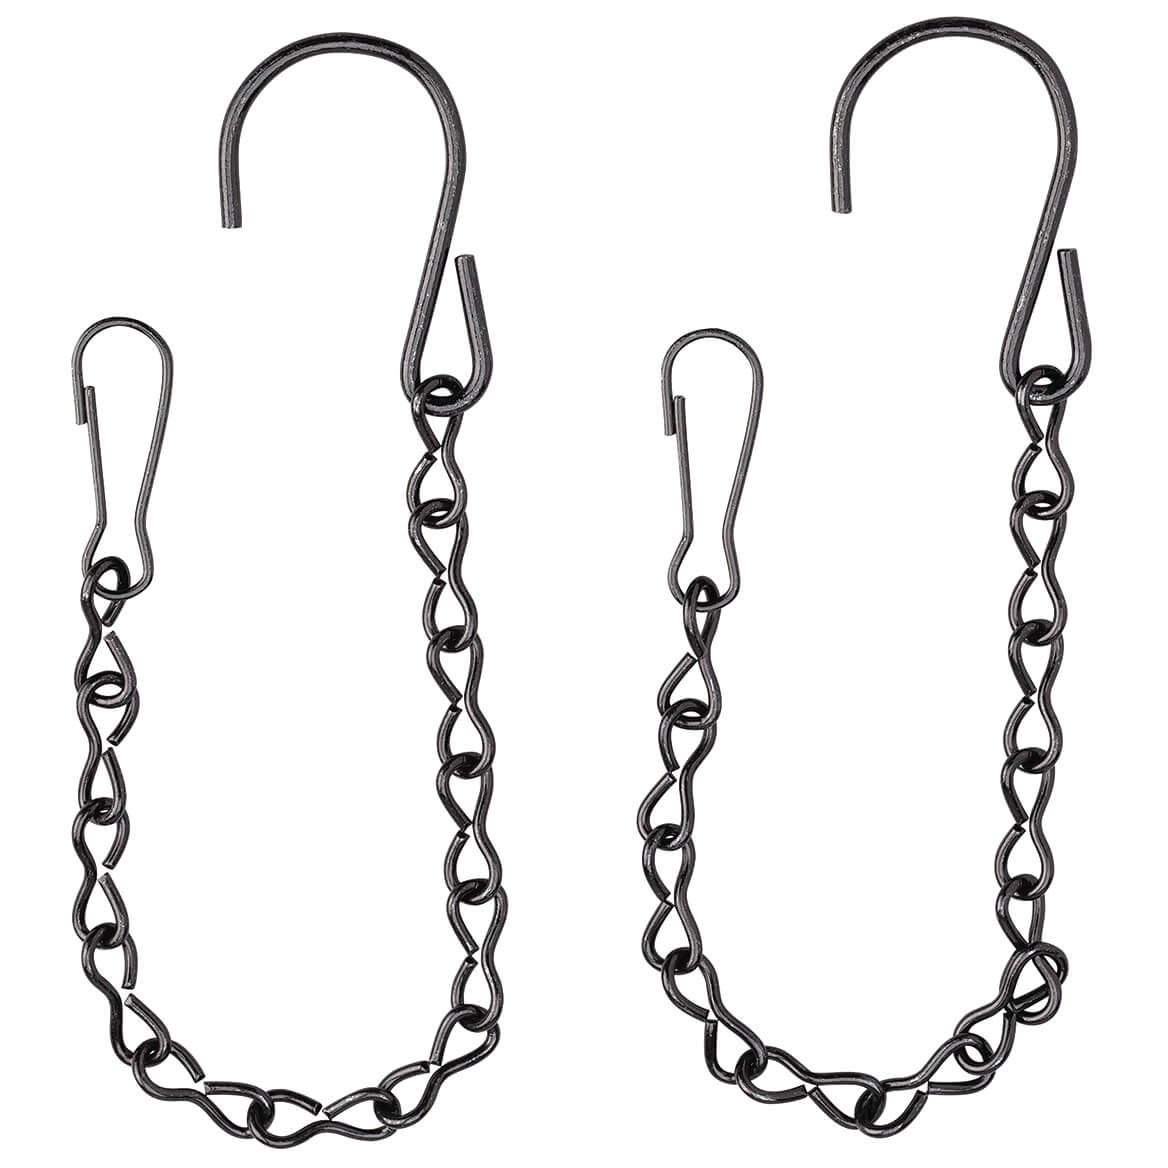 Metal Chains with Hooks, Set of 2 + '-' + 375491